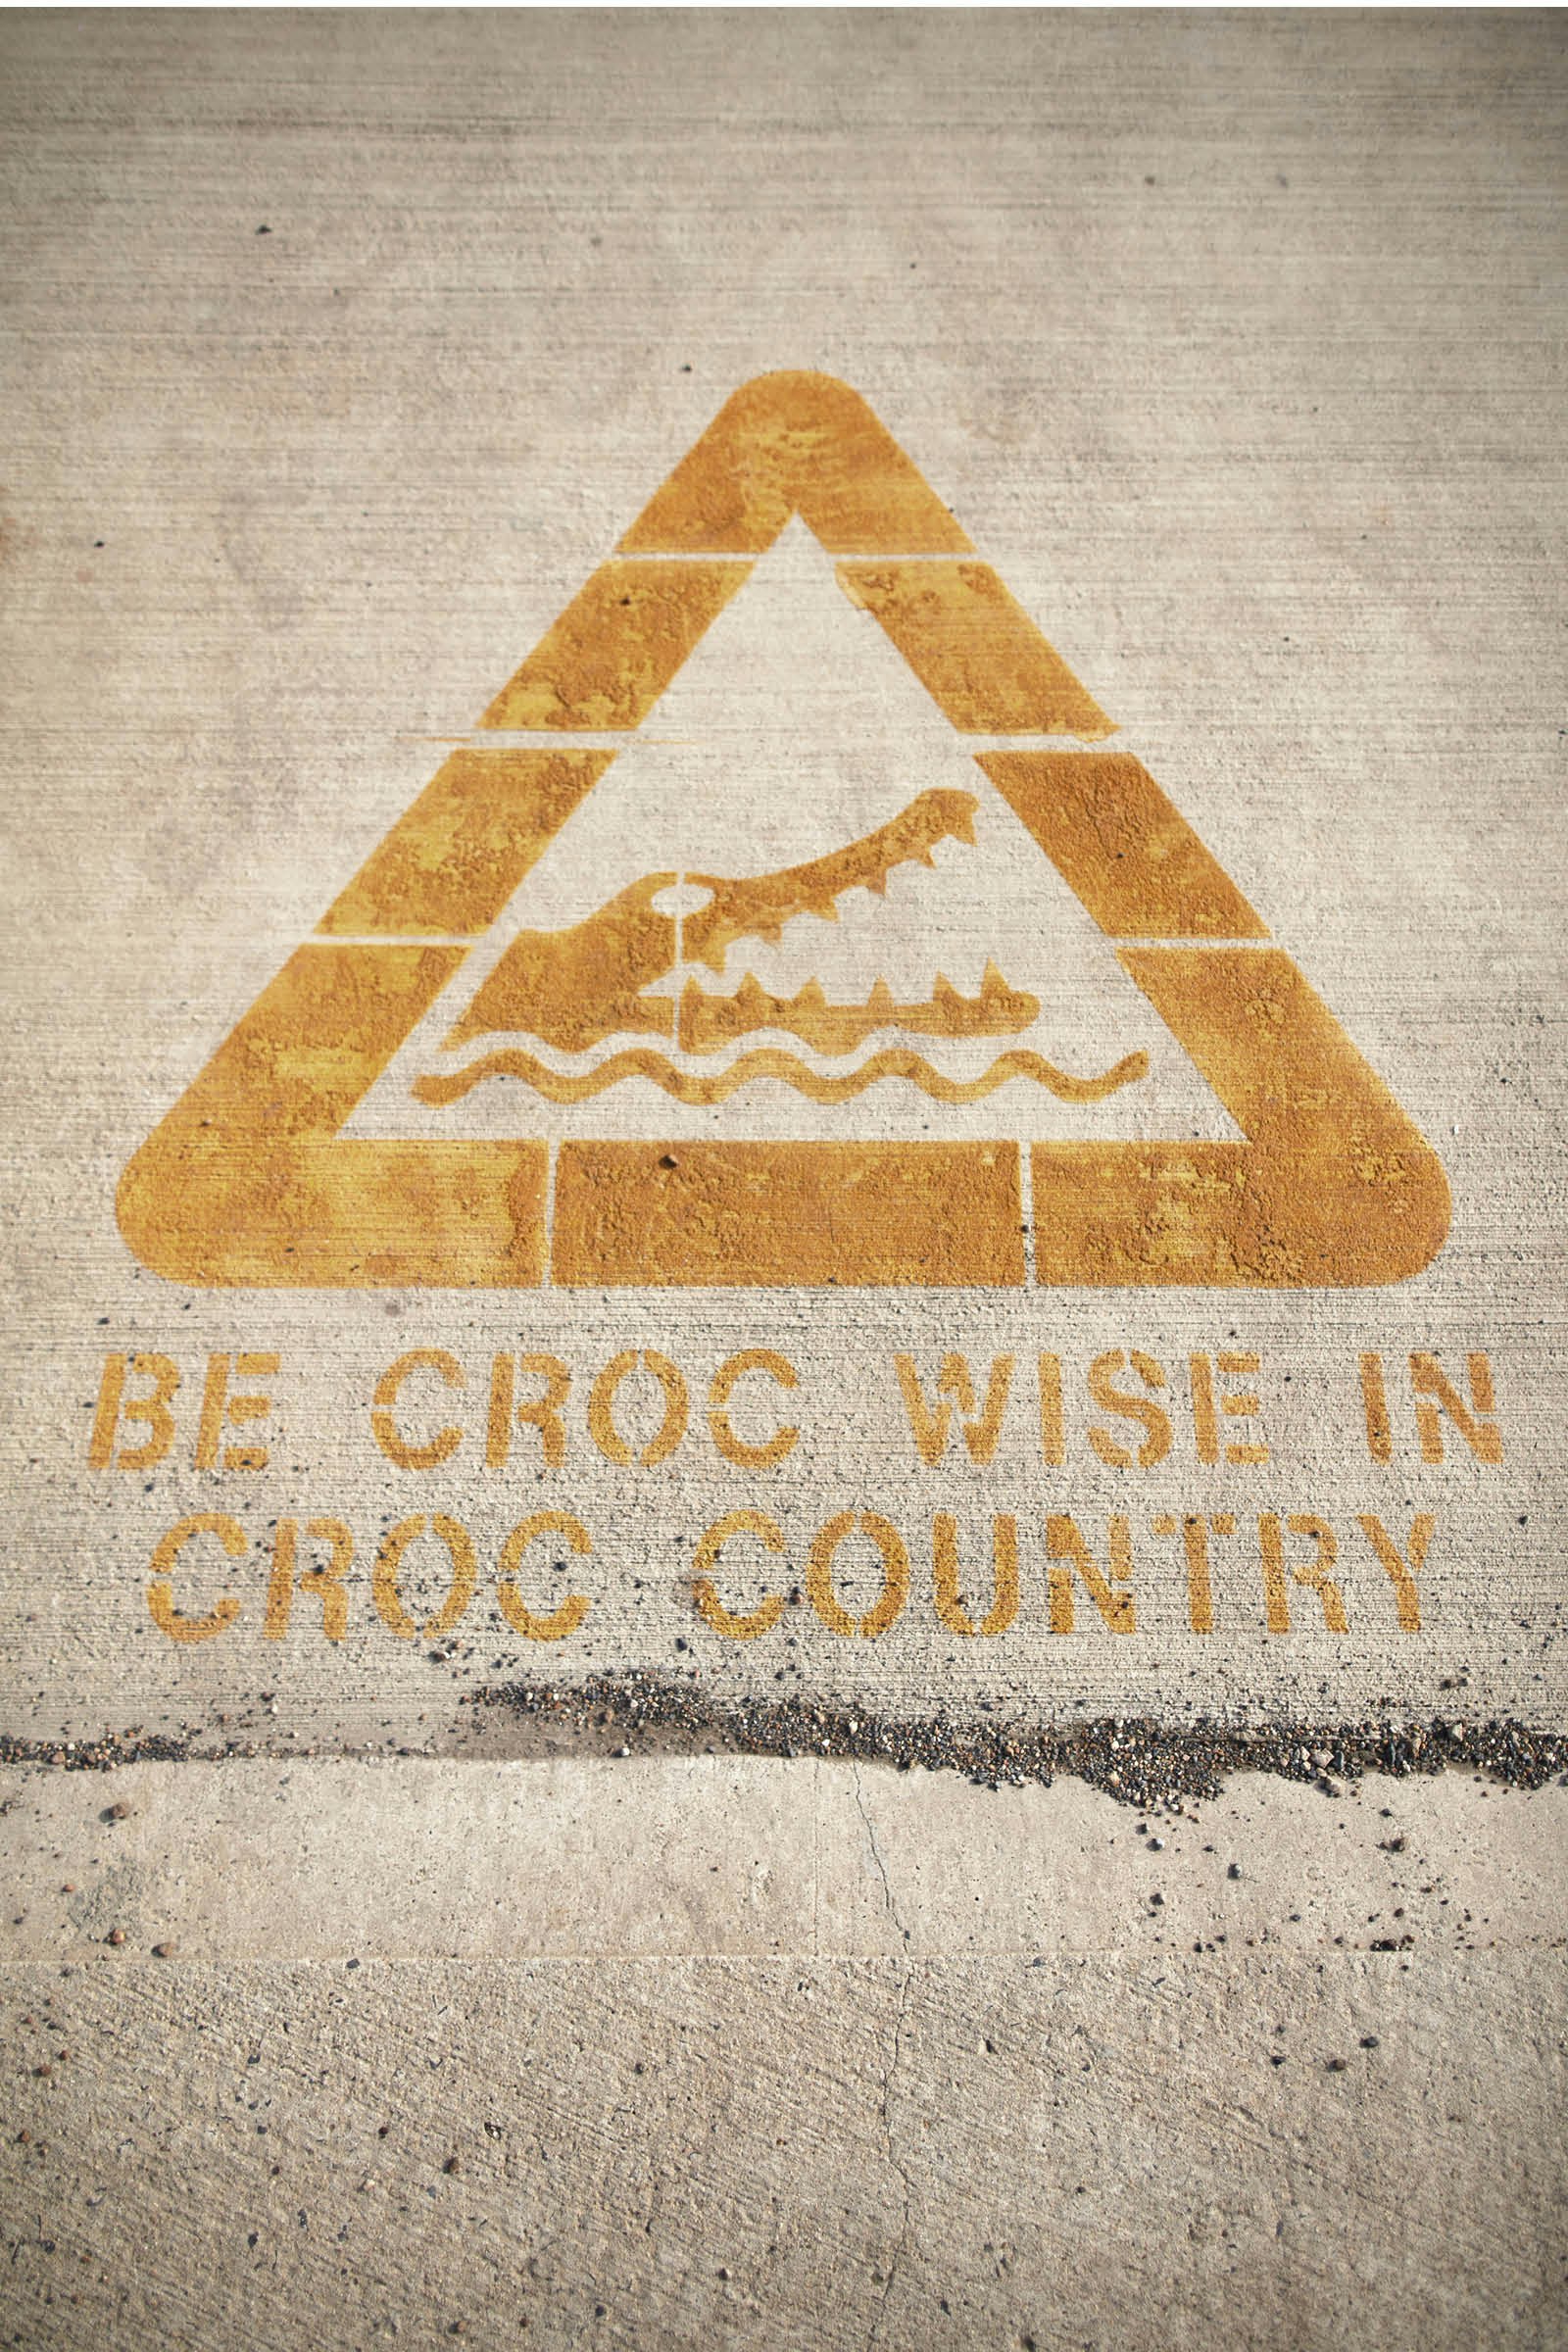 A crocodile warning sign stencilled on a pavement